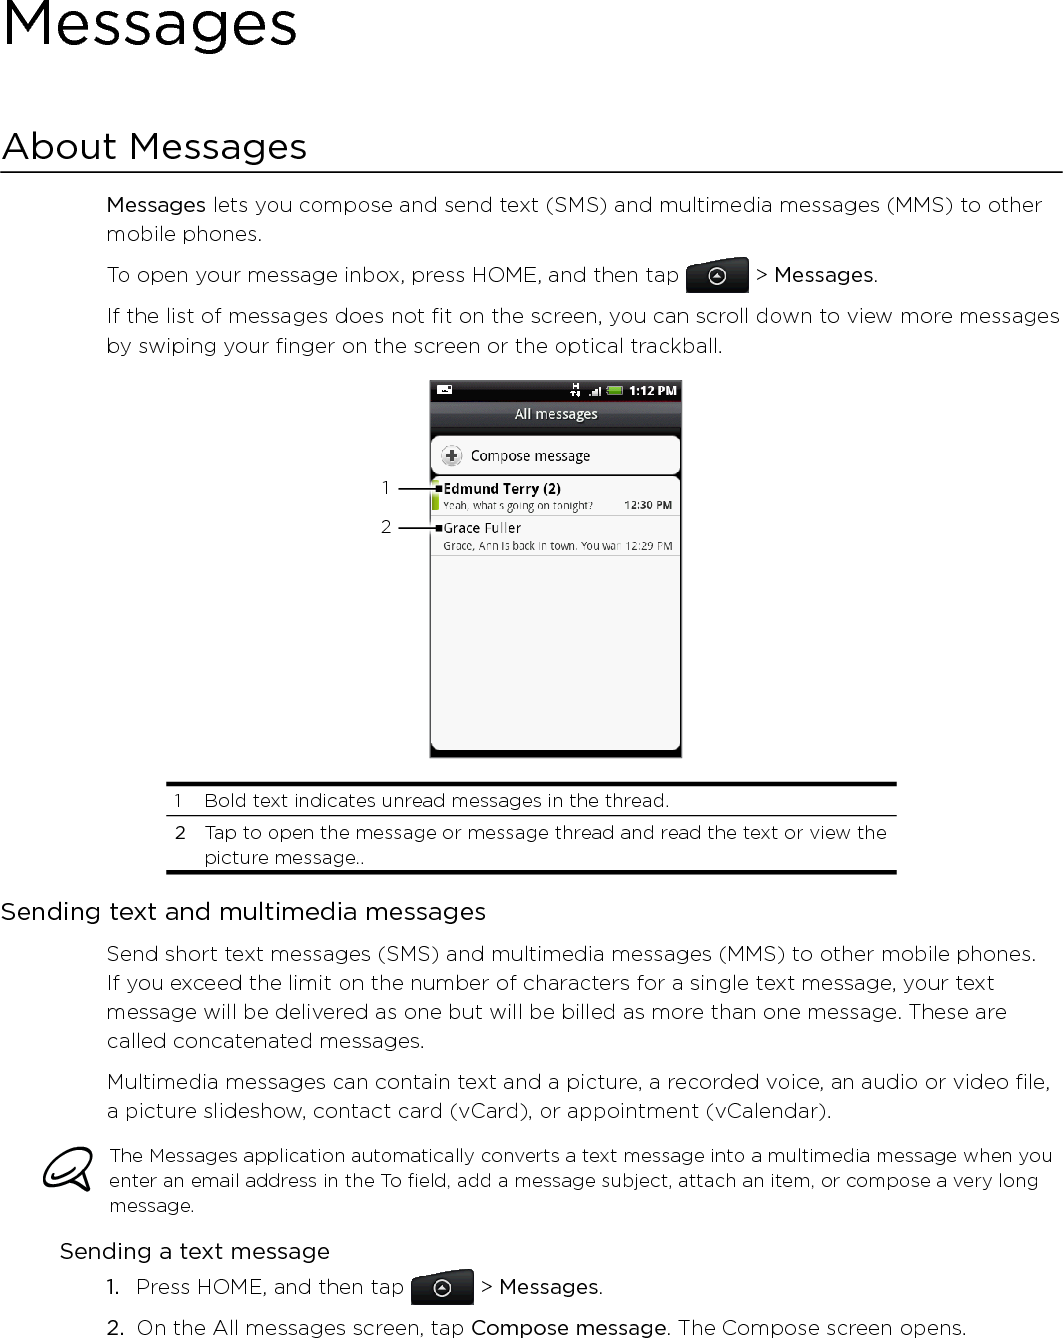 MessagesAbout MessagesMessages lets you compose and send text (SMS) and multimedia messages (MMS) to other mobile phones.To open your message inbox, press HOME, and then tap   &gt; Messages.If the list of messages does not fit on the screen, you can scroll down to view more messages by swiping your finger on the screen or the optical trackball. 121  Bold text indicates unread messages in the thread. 2  Tap to open the message or message thread and read the text or view the picture message..Sending text and multimedia messagesSend short text messages (SMS) and multimedia messages (MMS) to other mobile phones. If you exceed the limit on the number of characters for a single text message, your text message will be delivered as one but will be billed as more than one message. These are called concatenated messages.Multimedia messages can contain text and a picture, a recorded voice, an audio or video file, a picture slideshow, contact card (vCard), or appointment (vCalendar).The Messages application automatically converts a text message into a multimedia message when you enter an email address in the To field, add a message subject, attach an item, or compose a very long message.Sending a text messagePress HOME, and then tap   &gt; Messages.On the All messages screen, tap Compose message. The Compose screen opens.1.2.